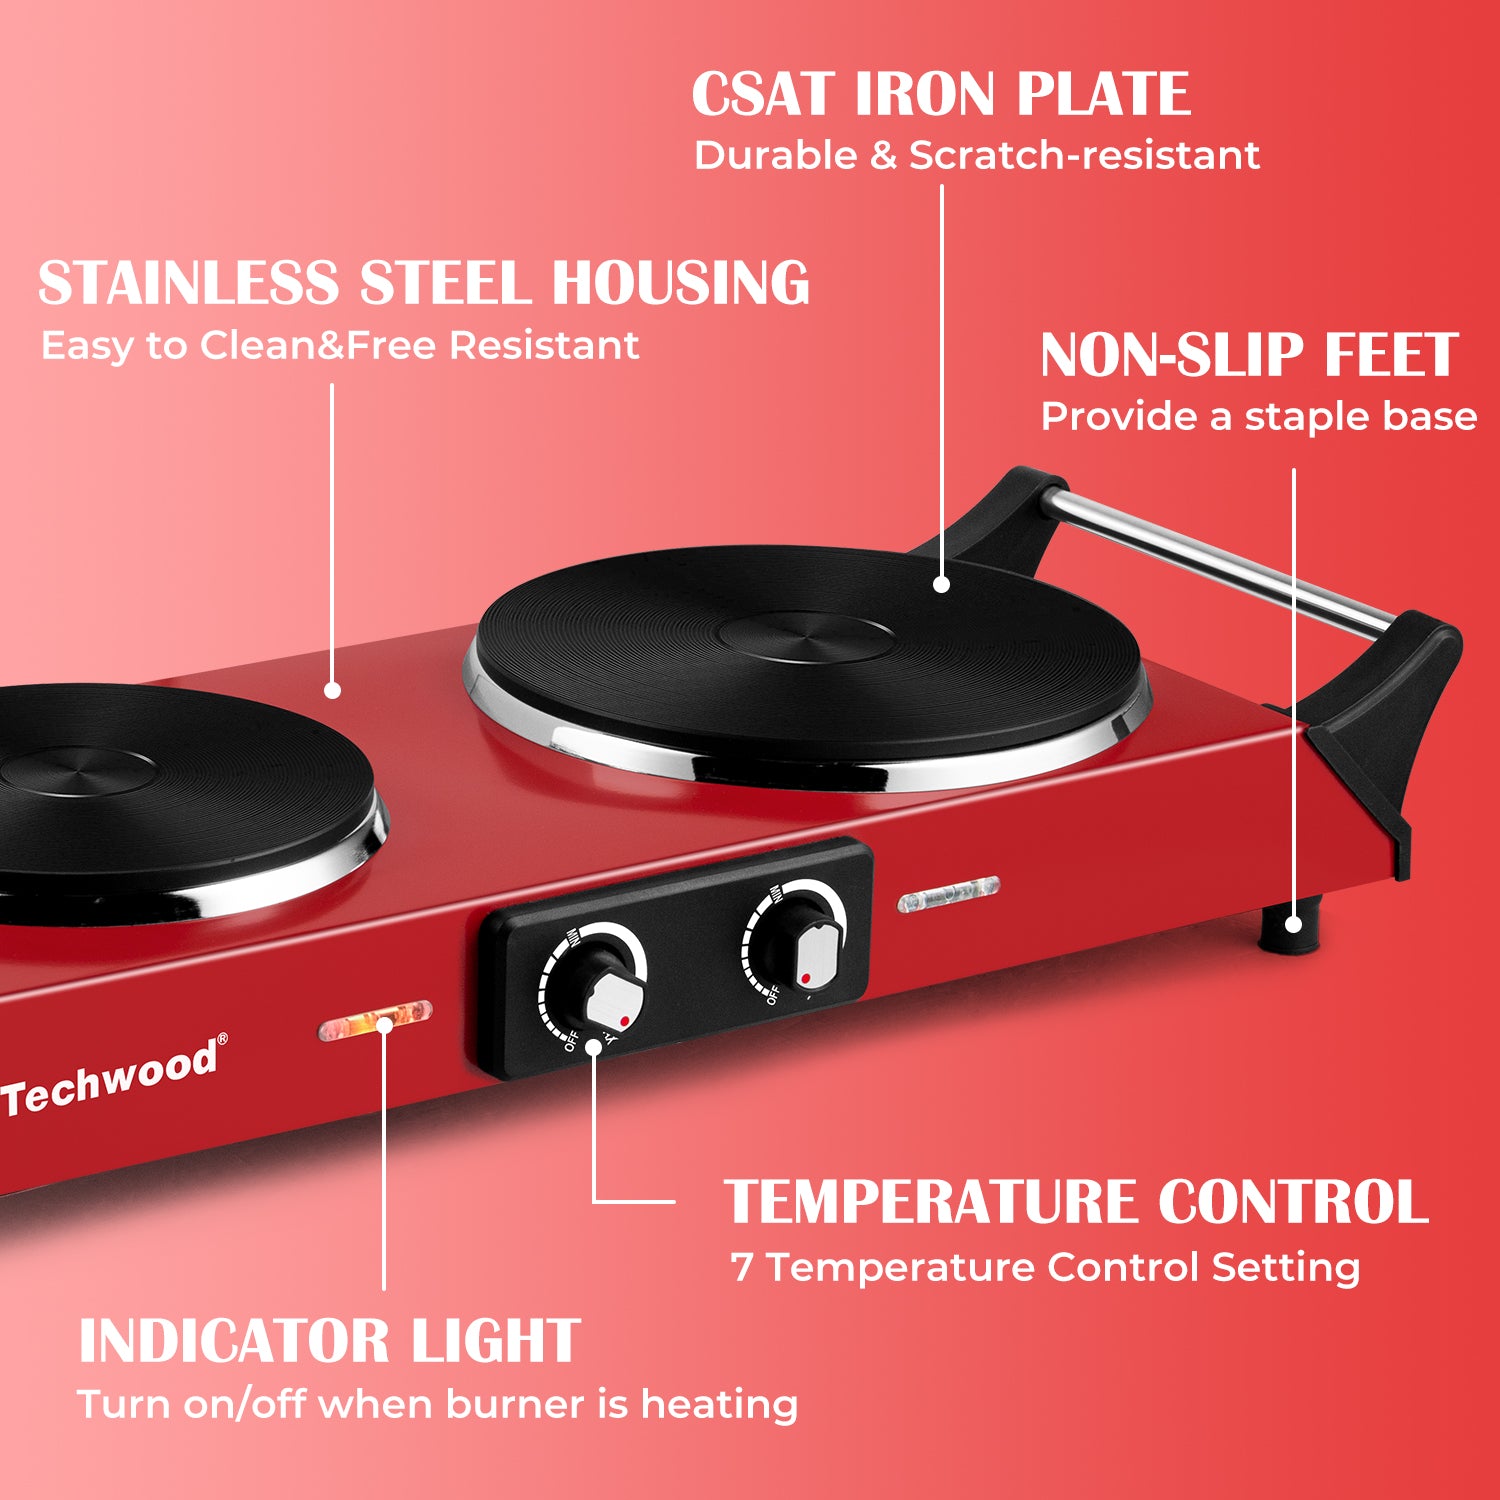 Hot Plate, Techwood 1800W Dual Electric Stove, Countertop Stove Double  Burner for Cooking, Infrared Ceramic Hot Plates Double Cooktop, Brushed